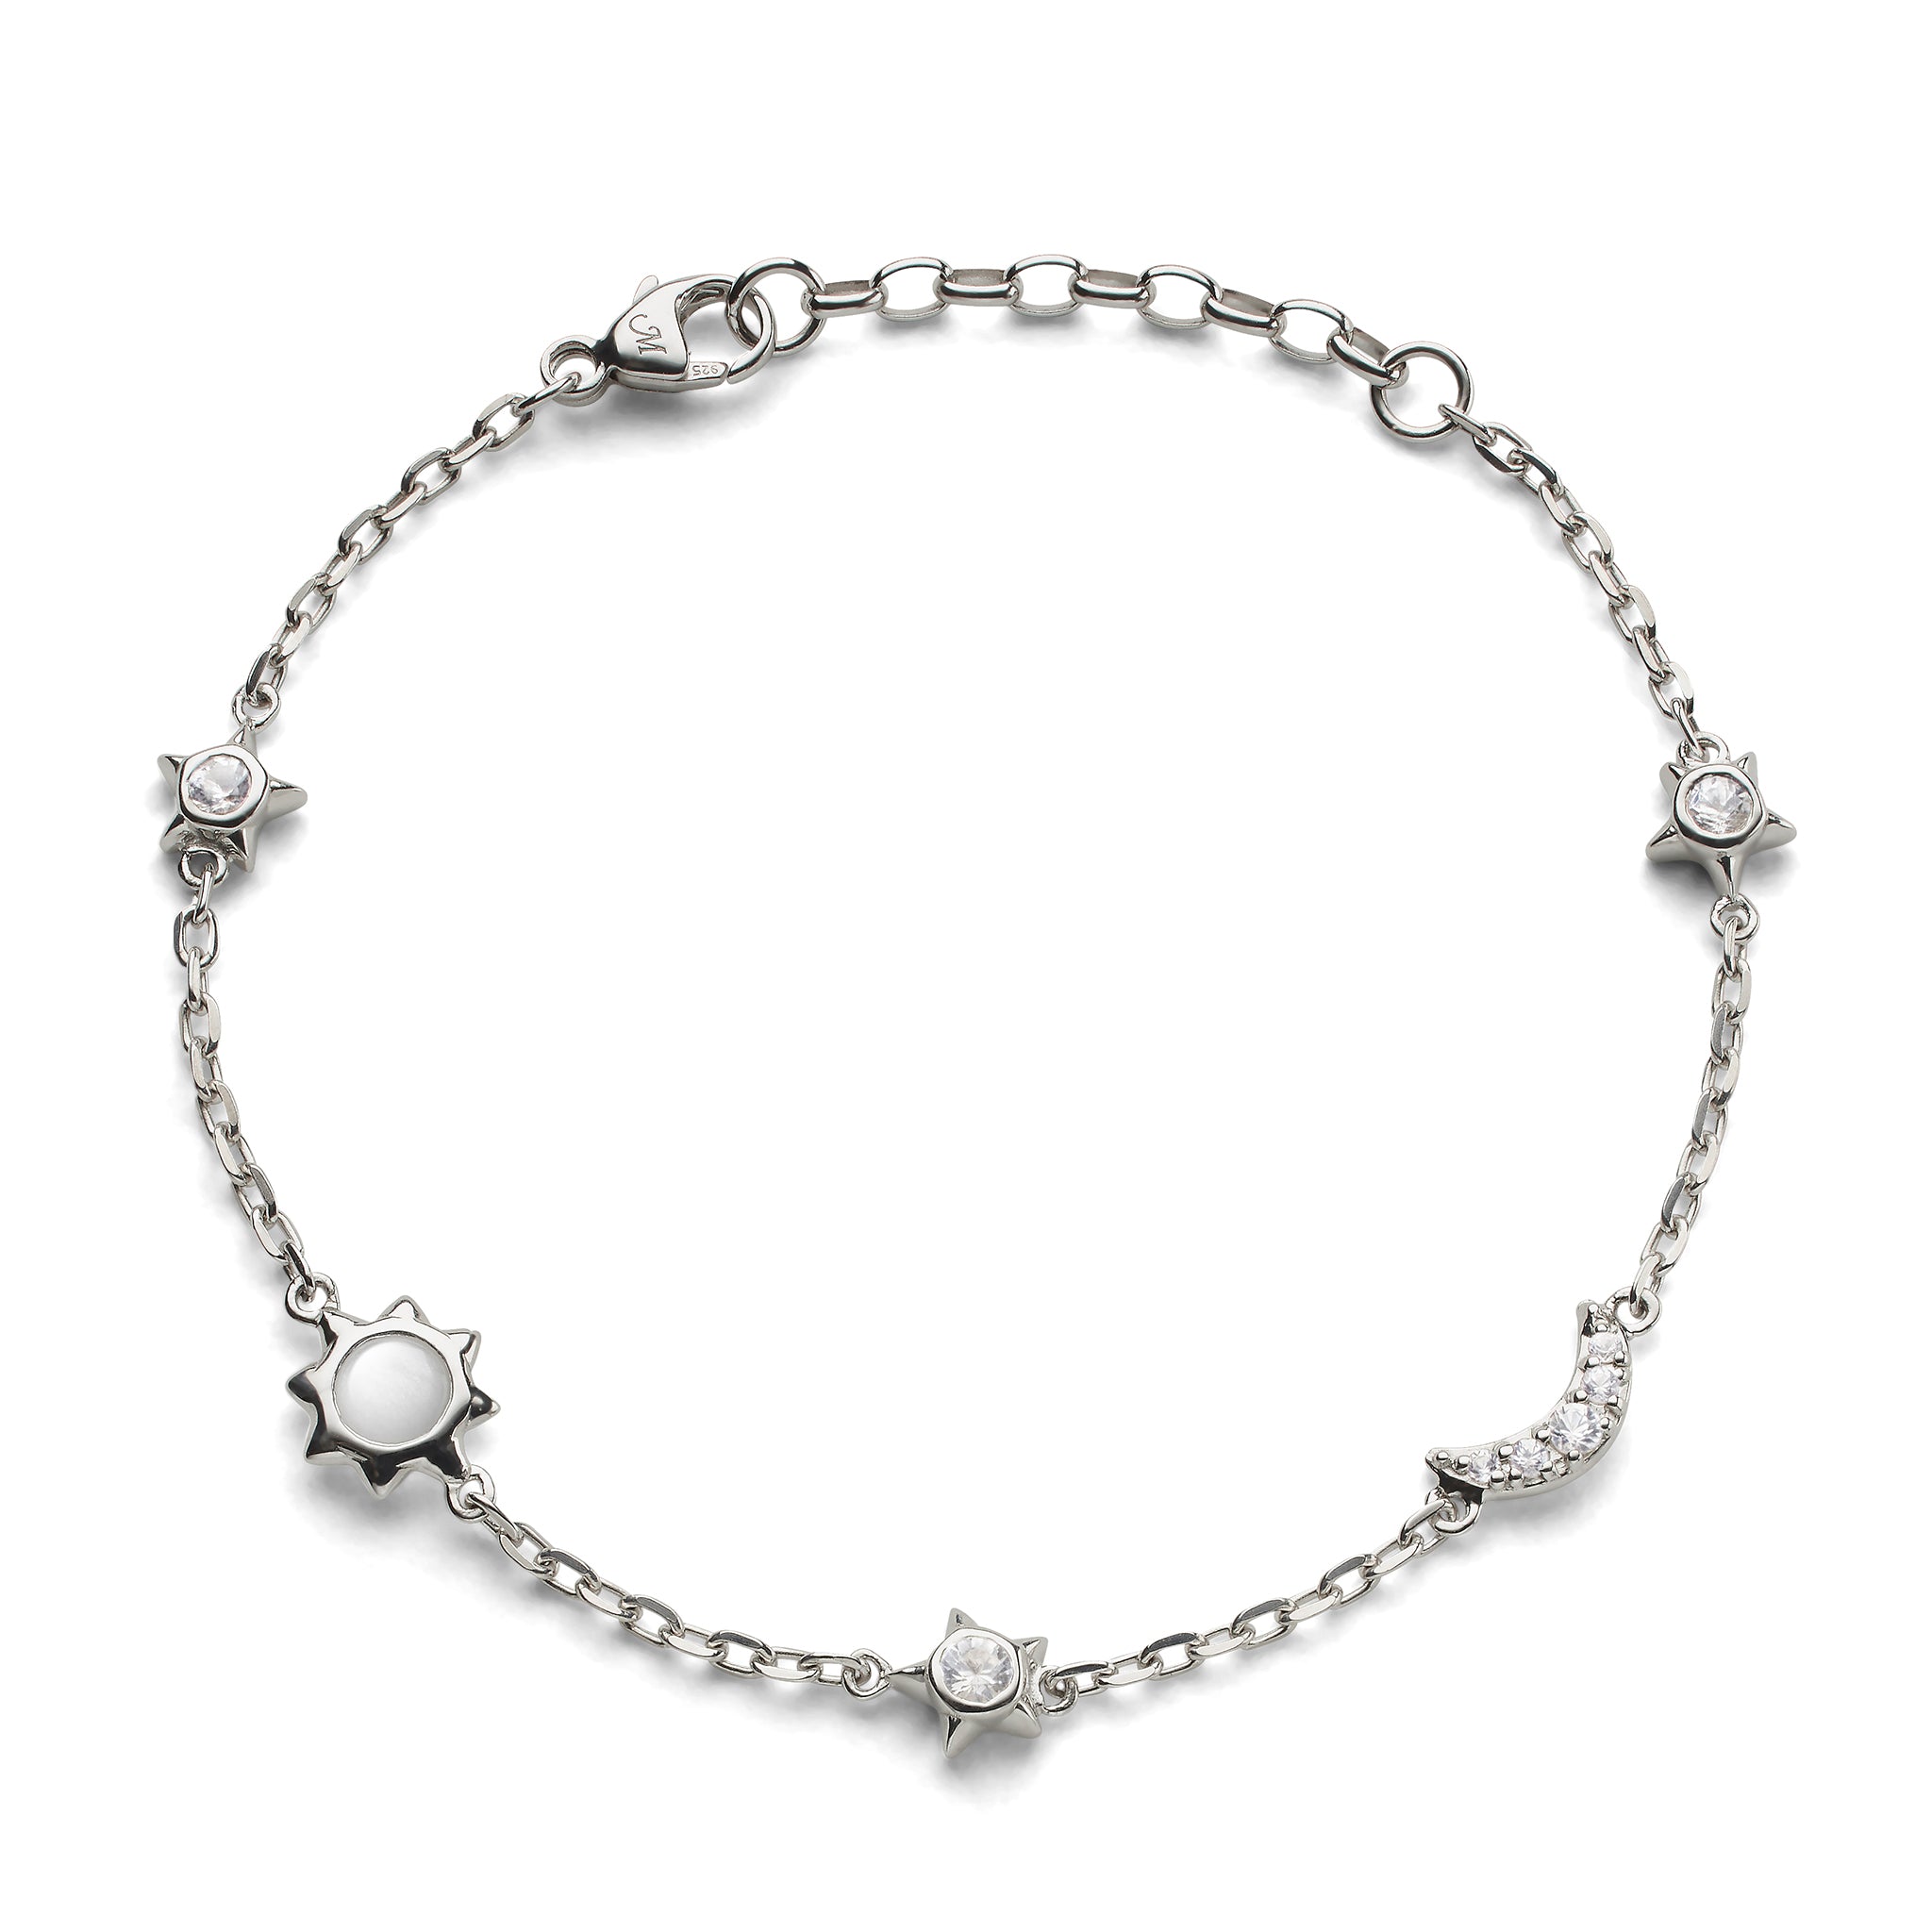 Terahertz Stone Bracelet with You are my Sunshine Sterling Silver Char